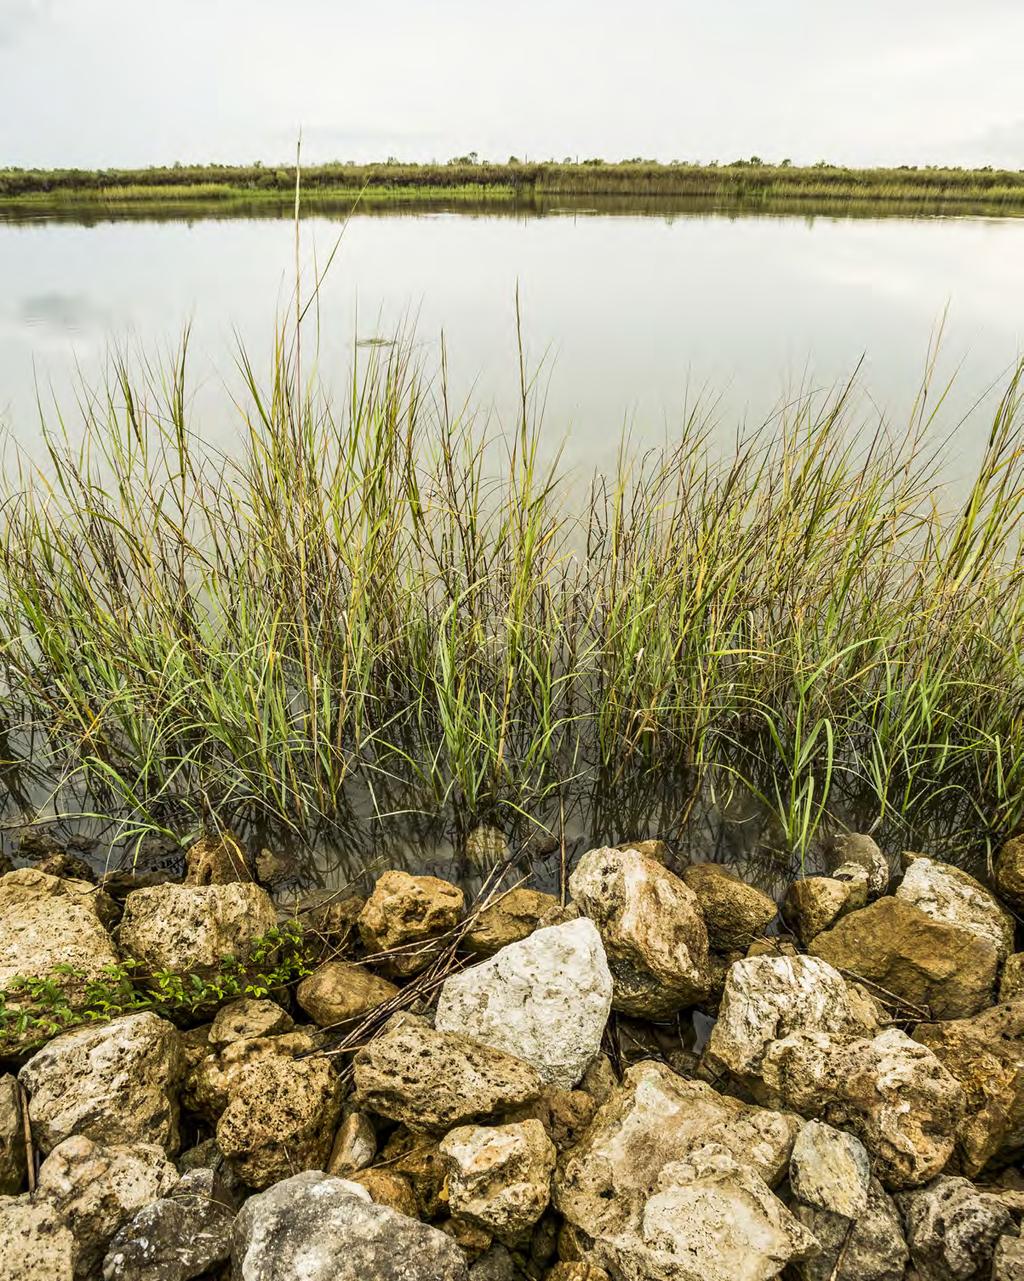 JEROD FOSTER/TNC $1.9 billion goes to the states and counties for ecological and economic restoration (Bucket 1). $1.6 billion goes to the Gulf RESTORE Council for support of environmental restoration projects across the Gulf (Bucket 2).